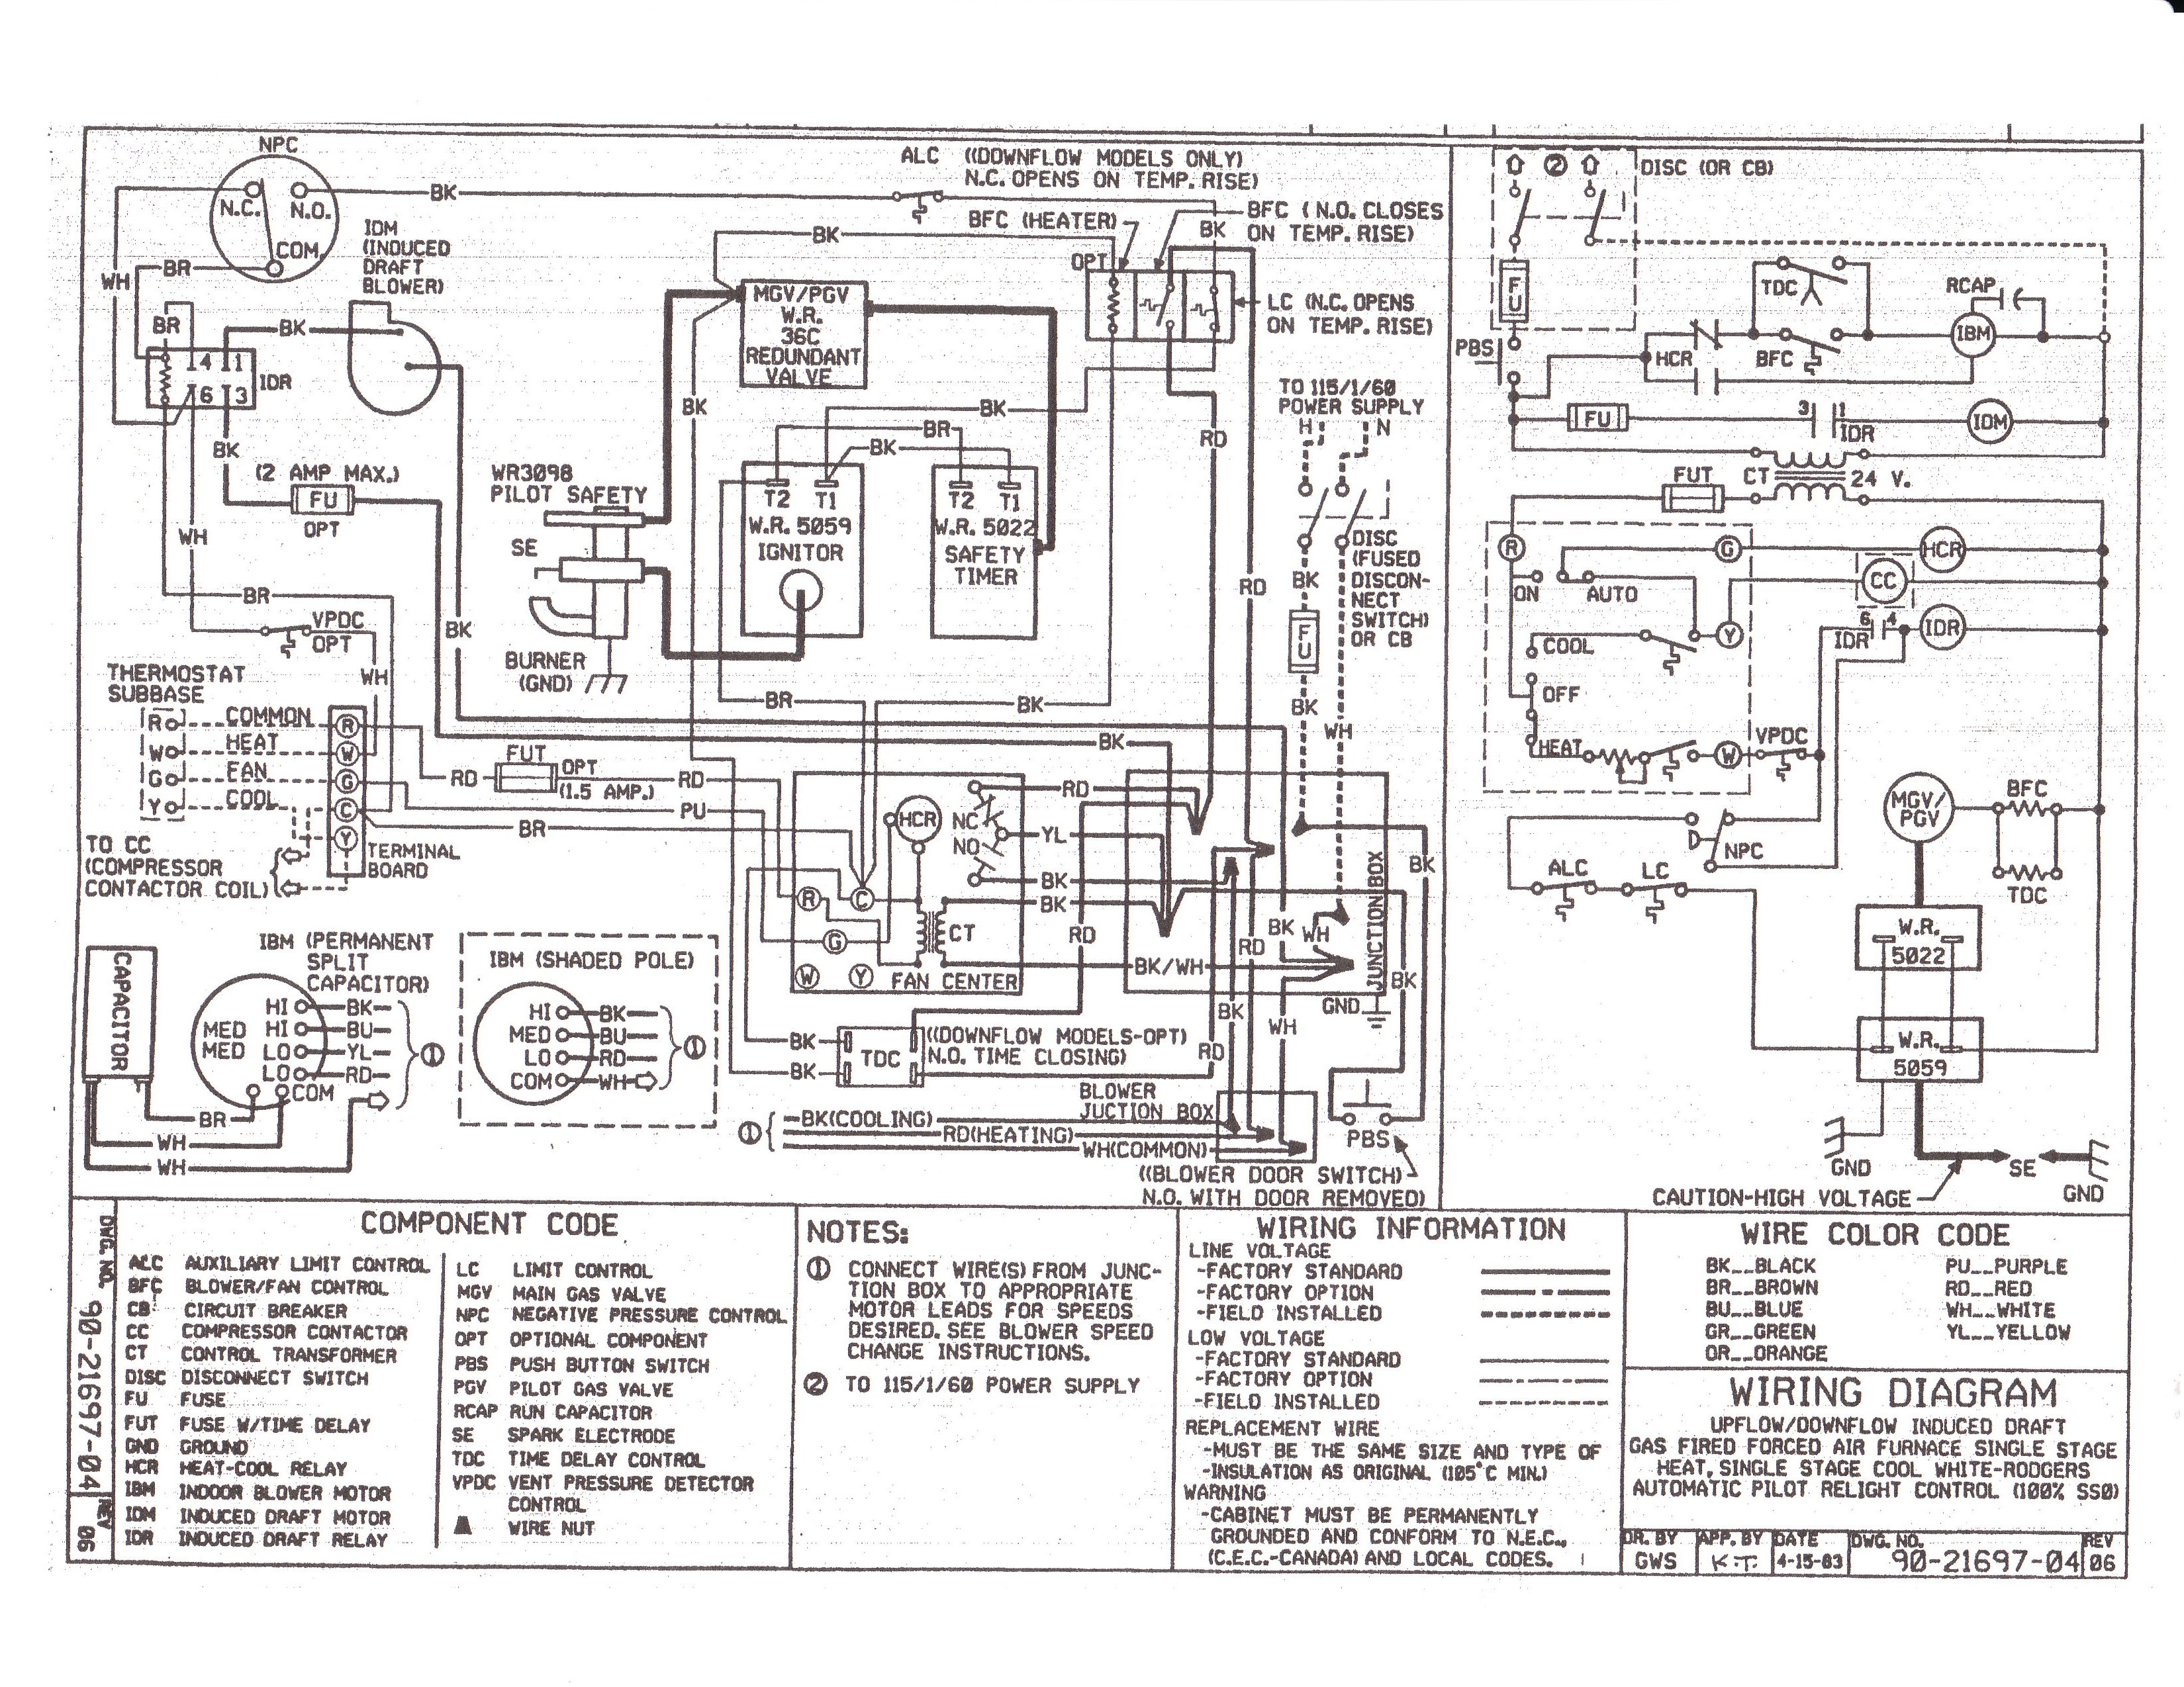 Coleman Electric Furnace Wiring Diagram Lovely Intertherm Electric Furnace Wiring Diagram 62 with Additional Of Coleman Electric Furnace Wiring Diagram